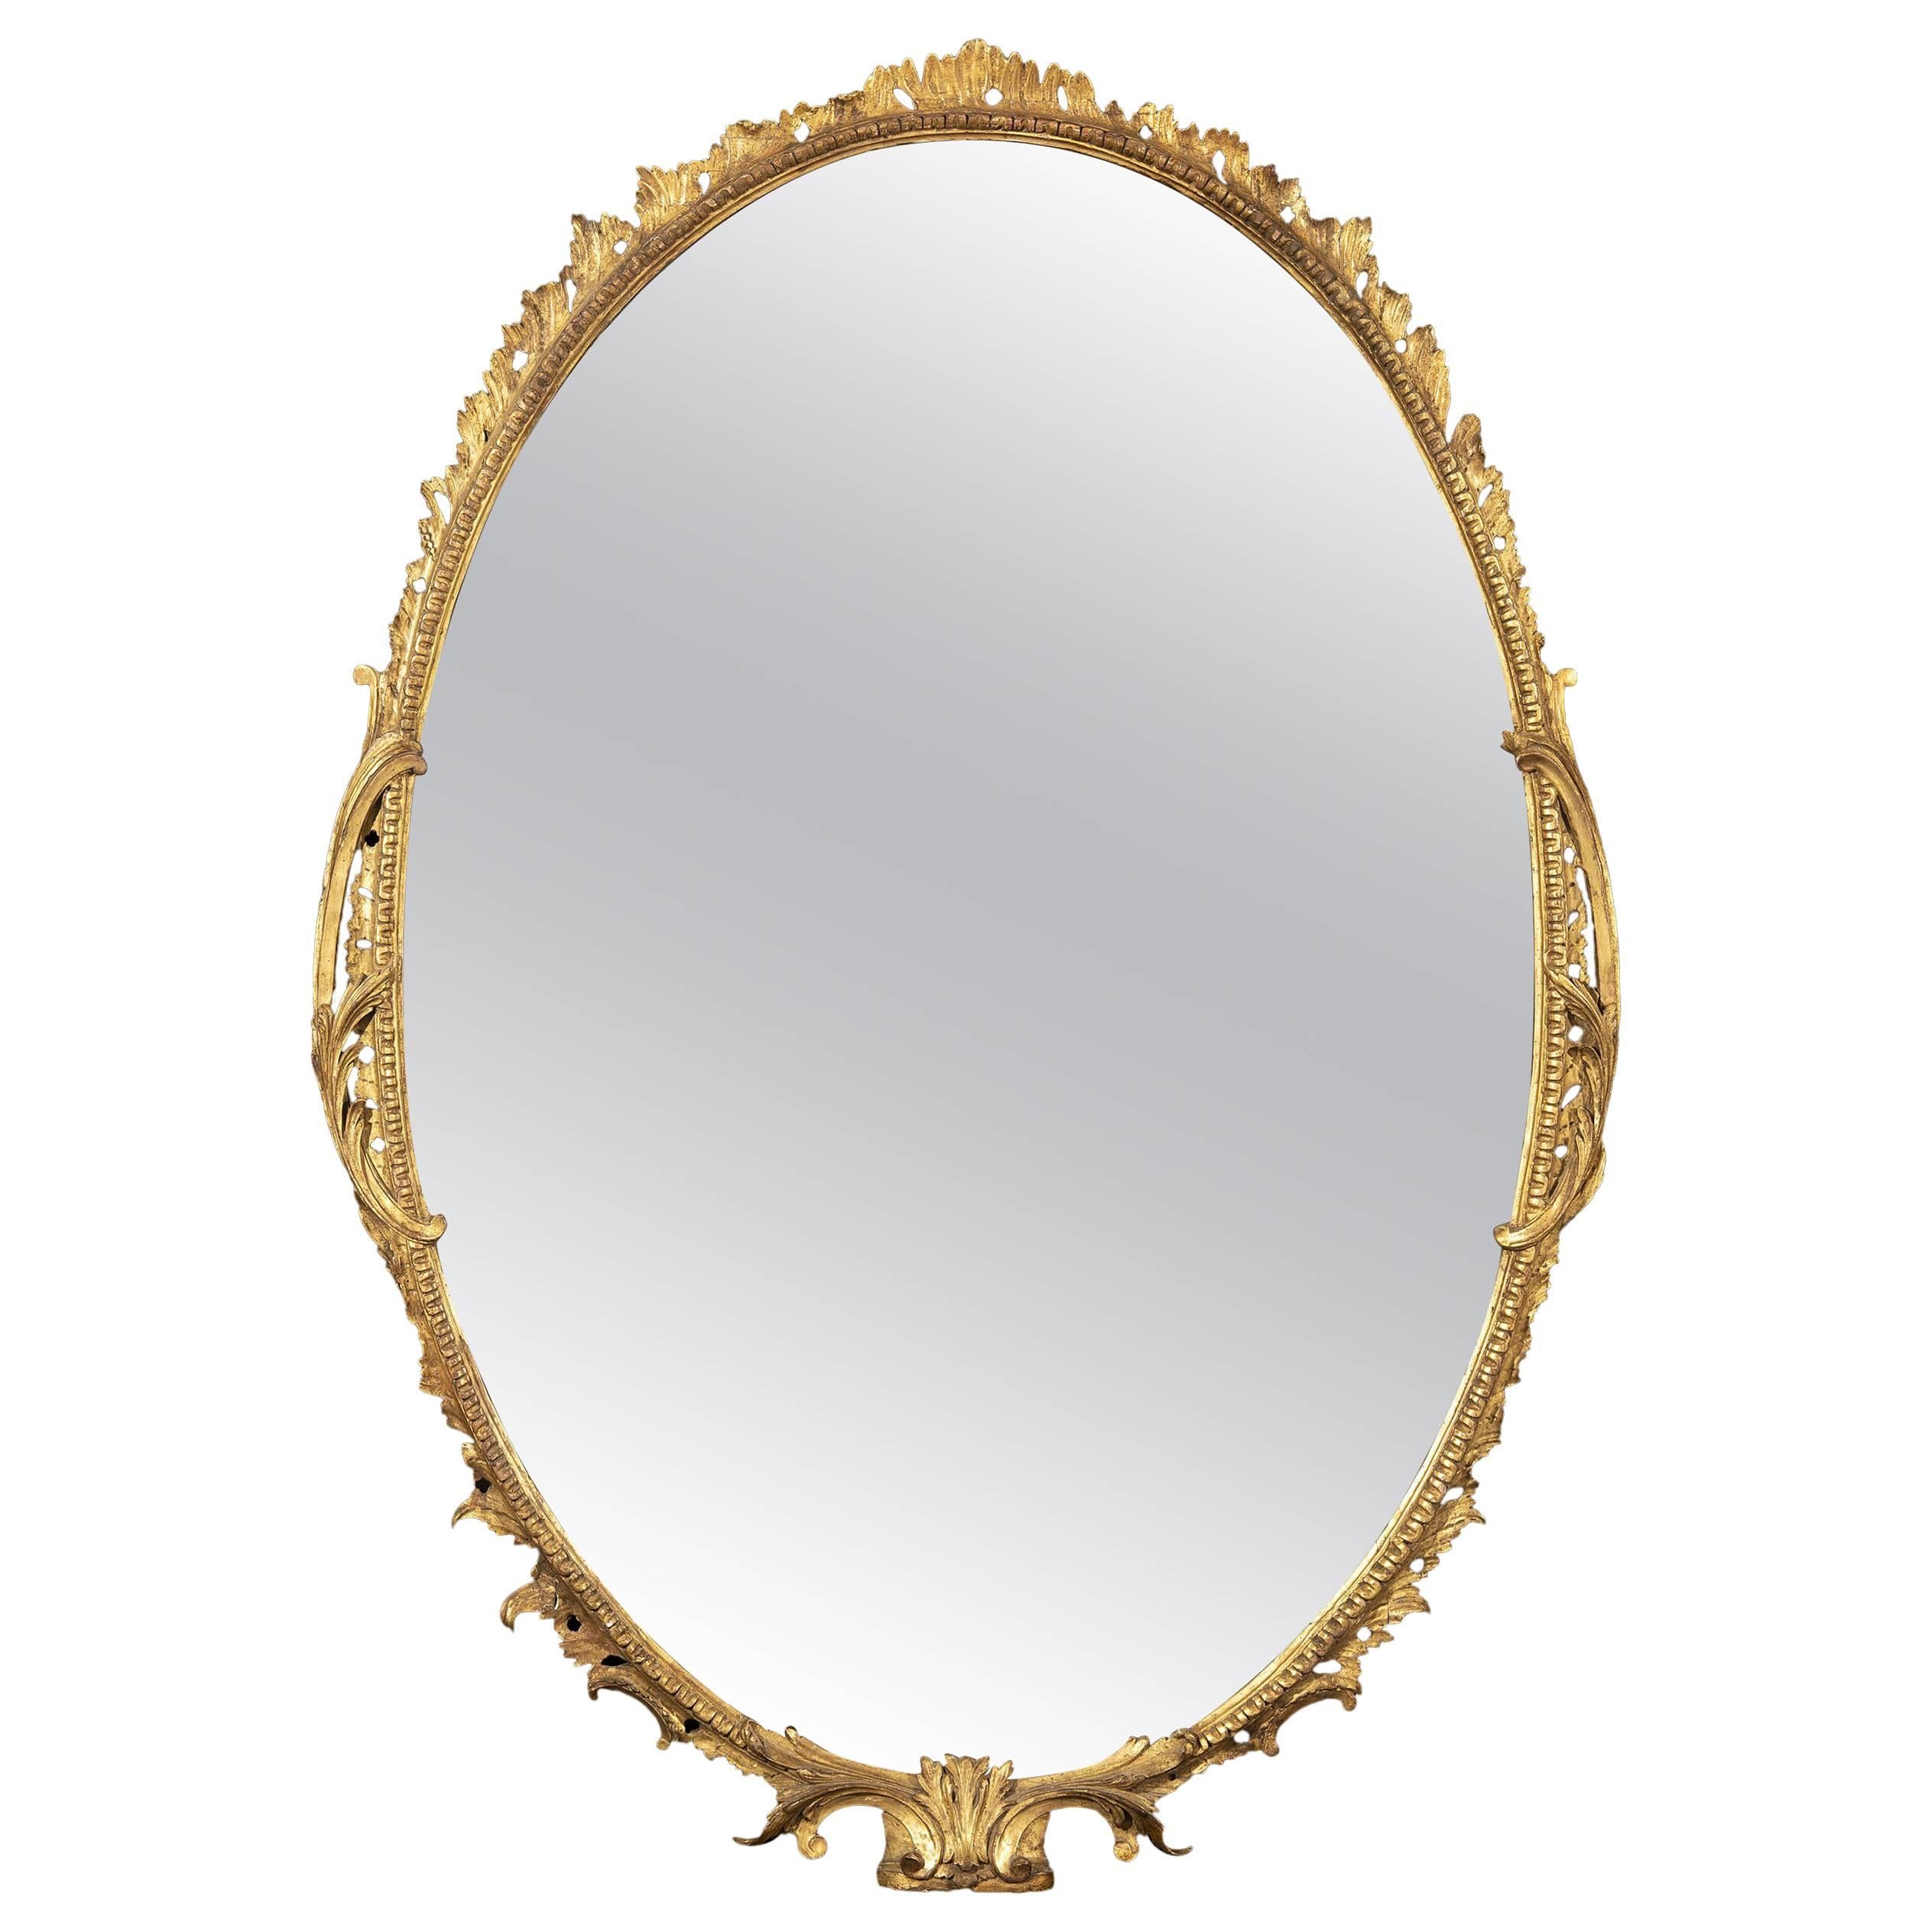 18th Century George III Period Carved Oval-Shaped Giltwood Mirror For Sale